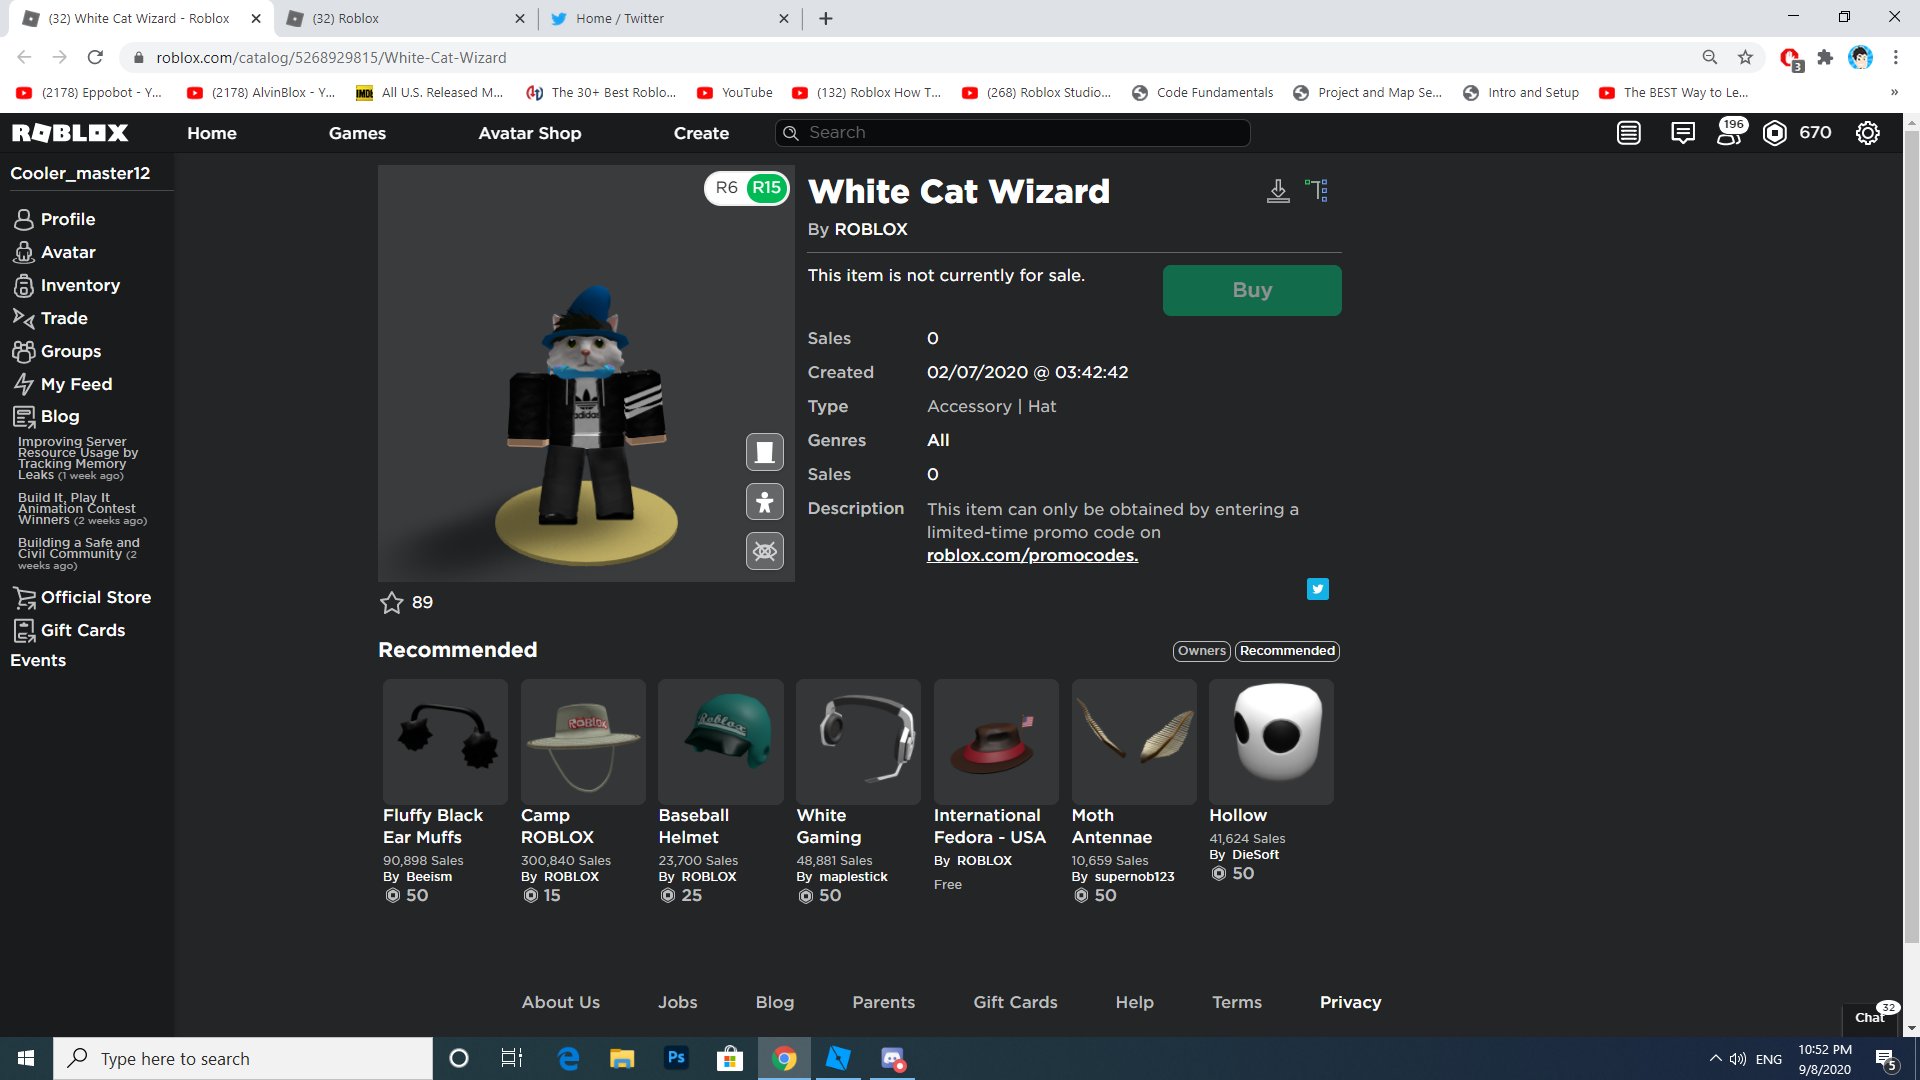 Choco Stick On Twitter Hi Quys Roblox Guys Released A New Promocode Item Pls Like And Retweet This Roblox Roblox Robloxdev Robloxdev - roblox codes white cat wizard